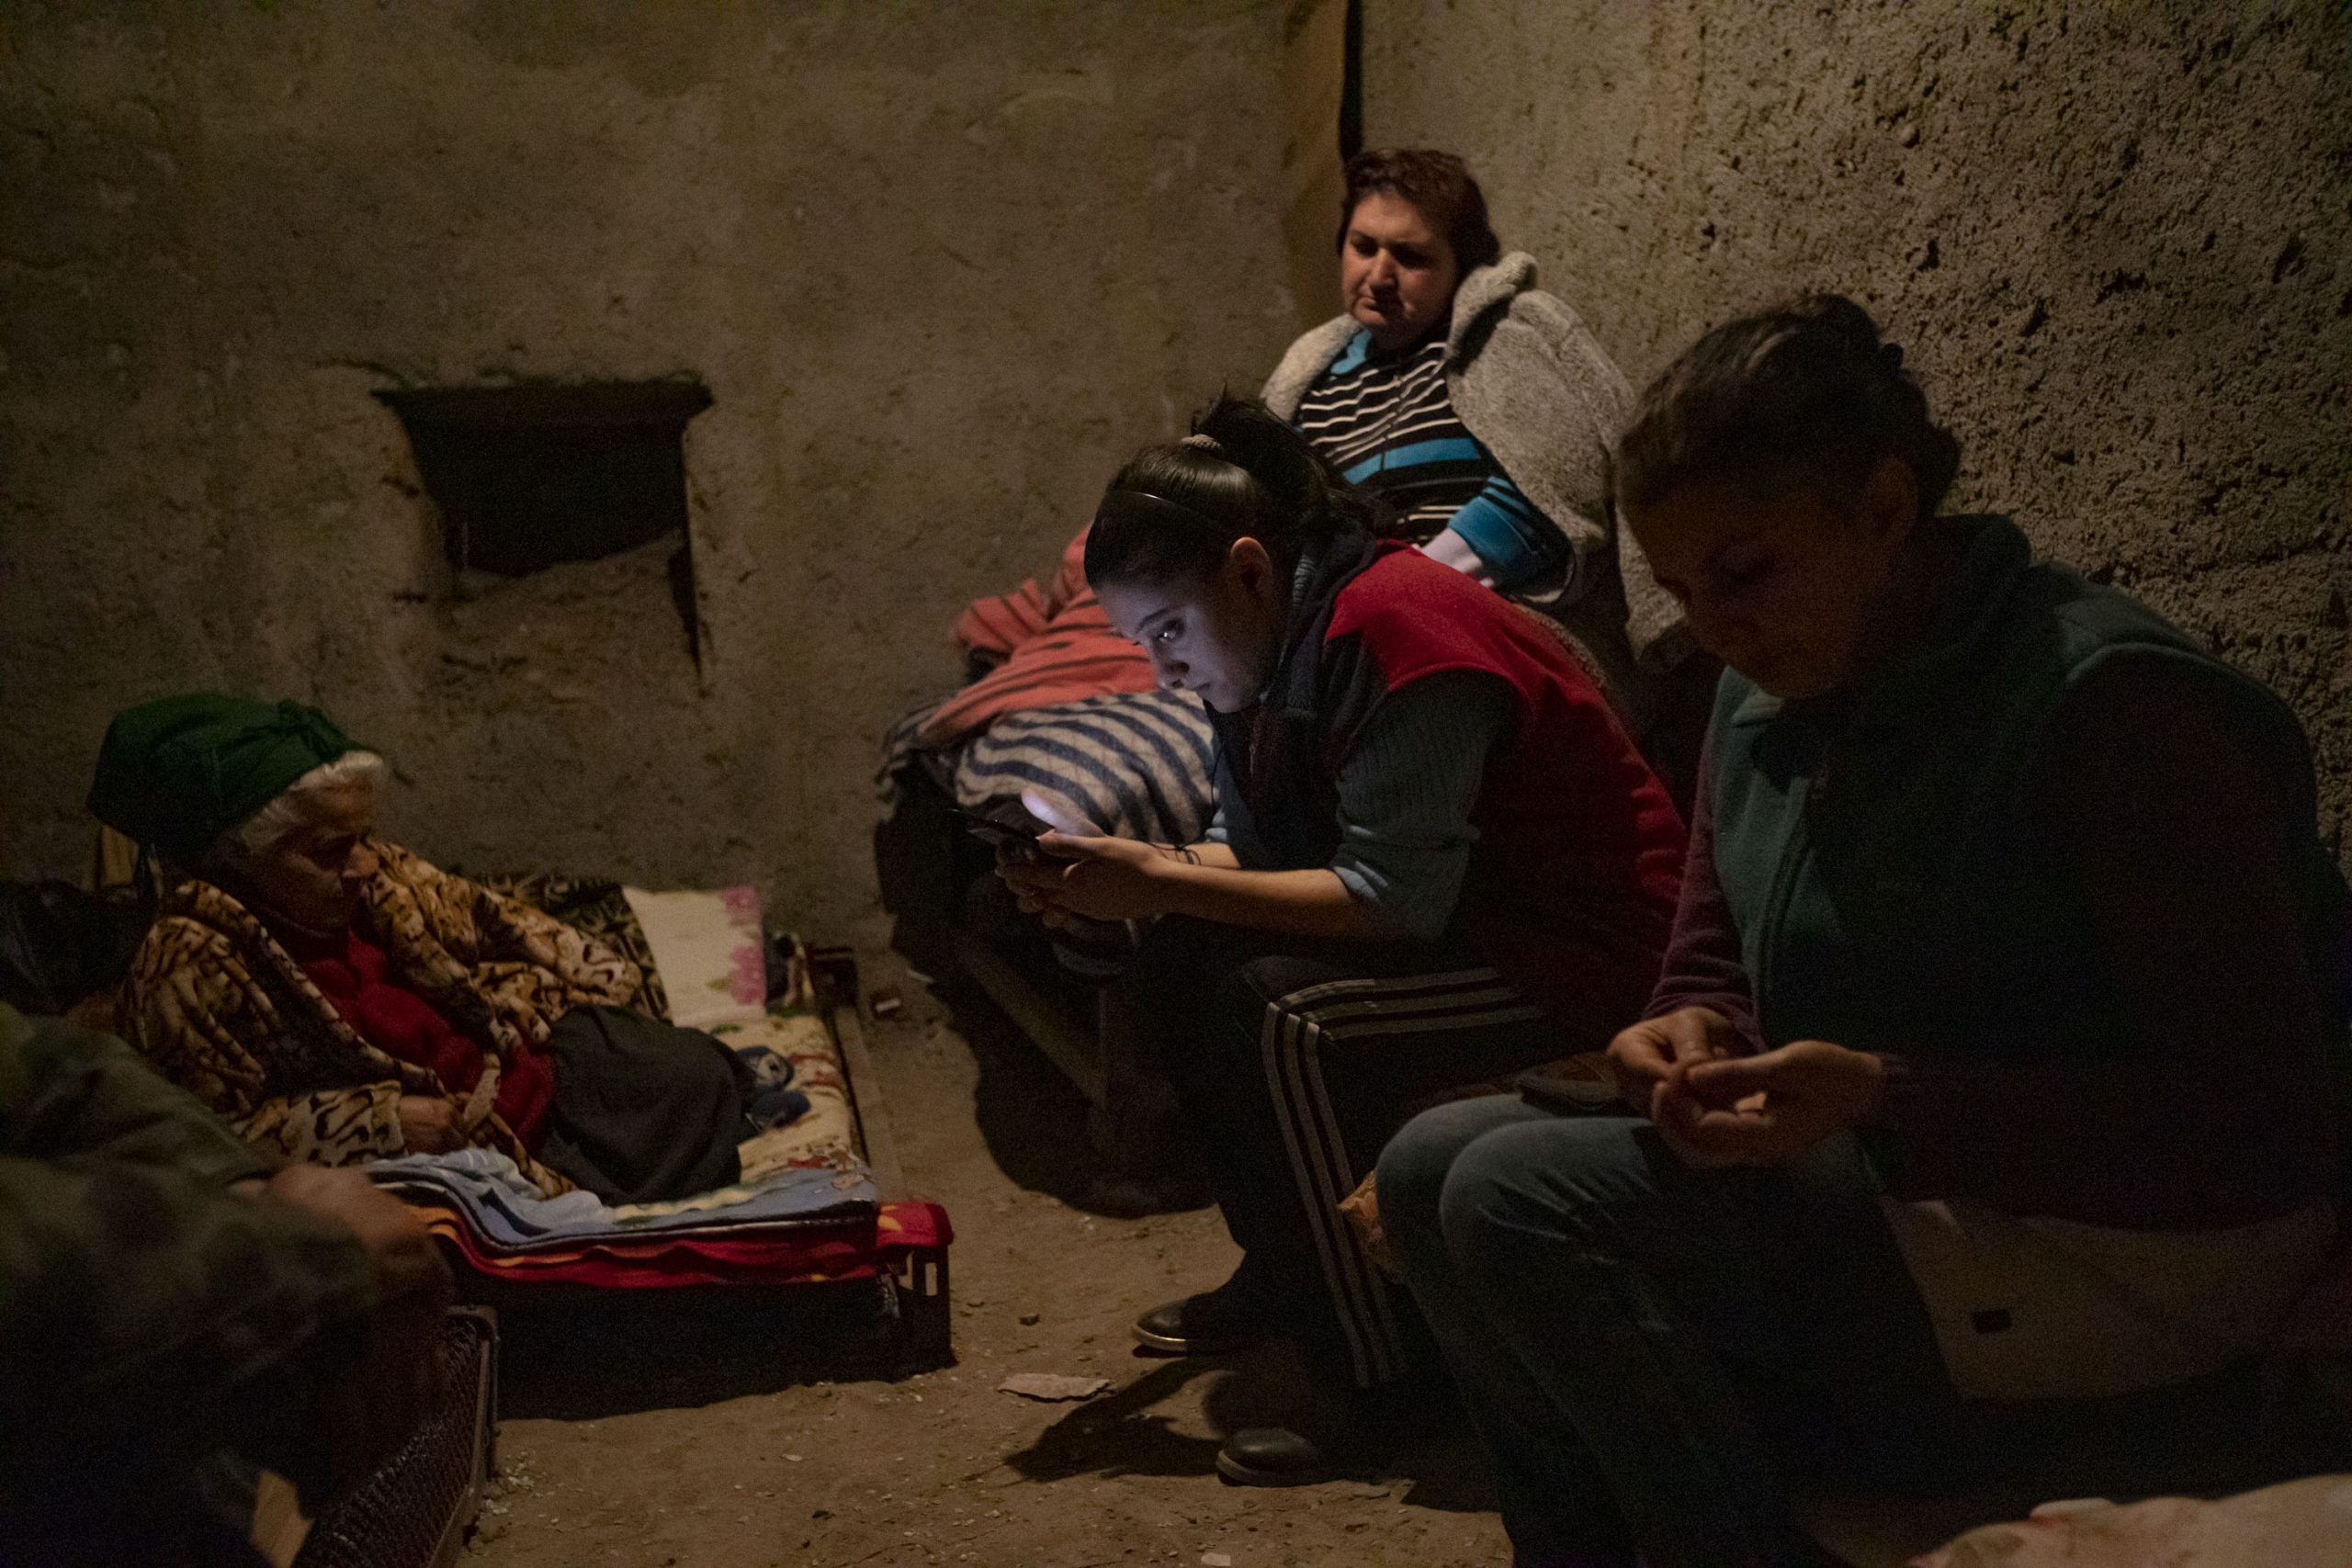 Residents of a five floor building hide in a shelter under their building, in Shushi, Nagorno-Karabakh, on October 16, 2020. The town, which Armenians call Shushi and Azerbaijanis call Shusha, came under Azerbaijan's control by the end of the Nagorno-Karabakh war.